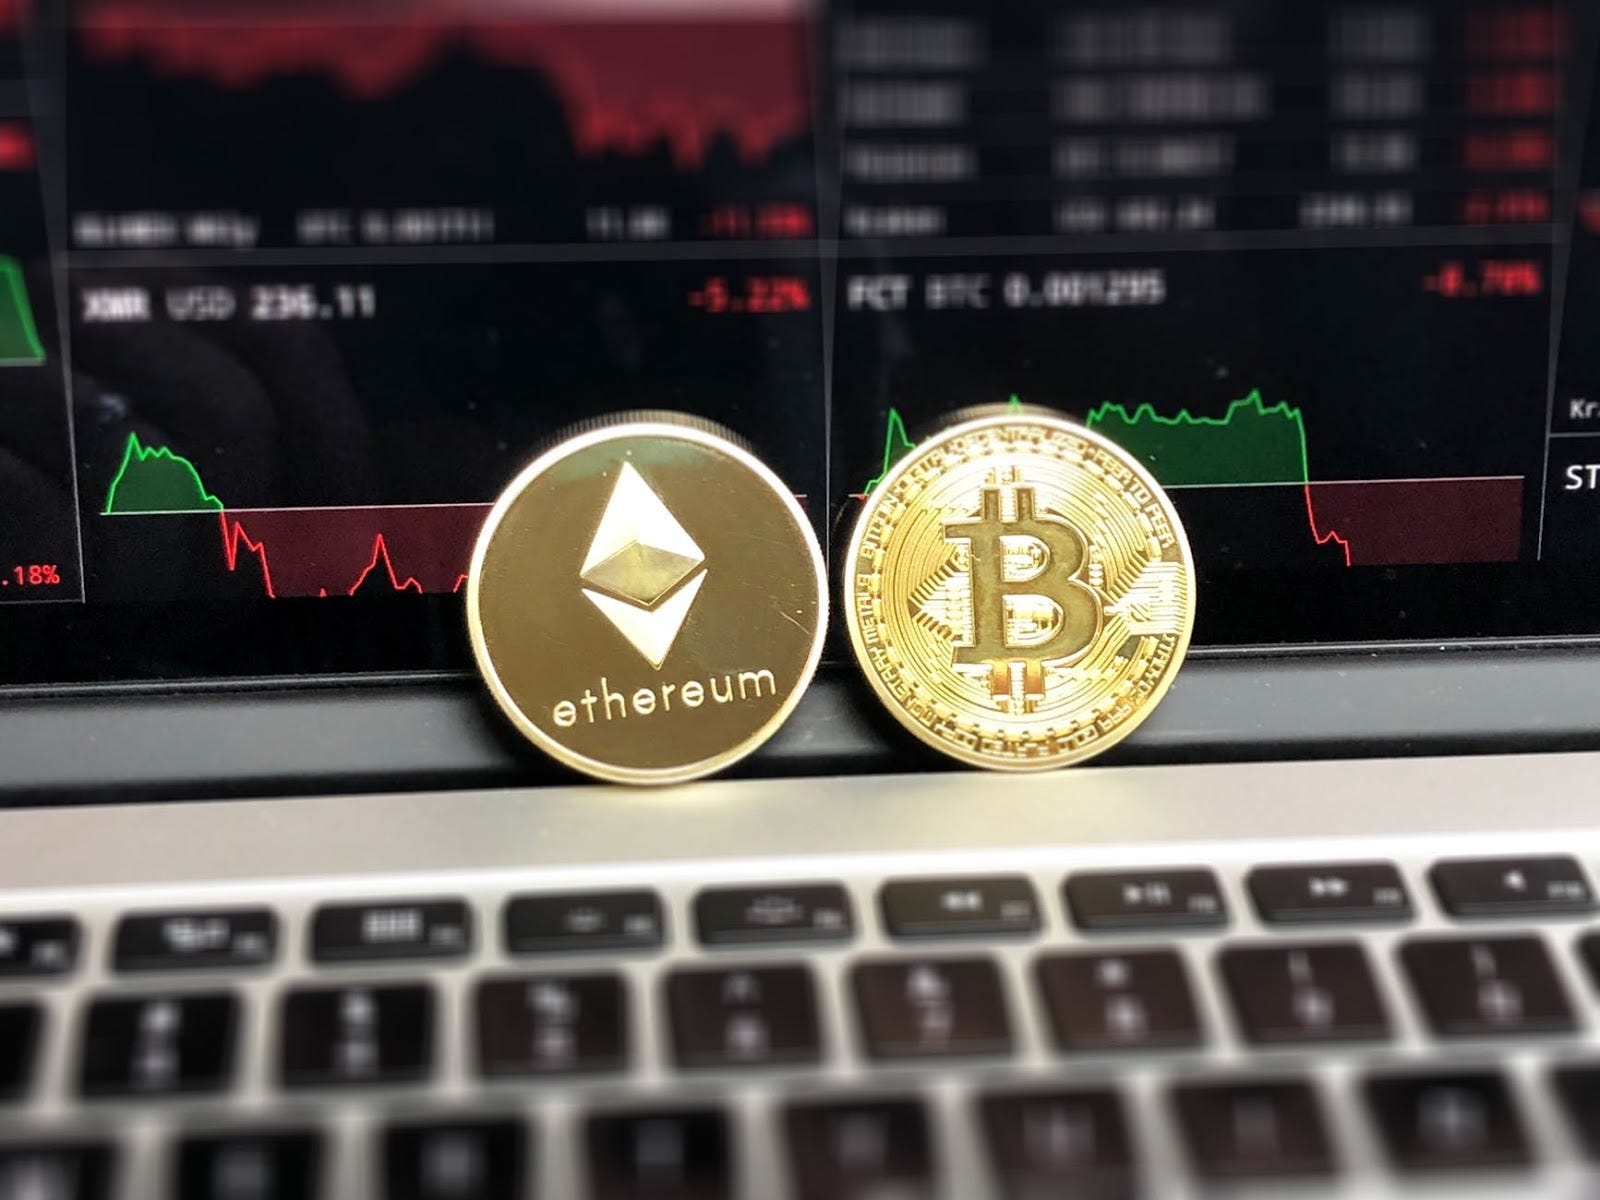 Ethereum-Based Stock Exchange Plans First Company Listing in June